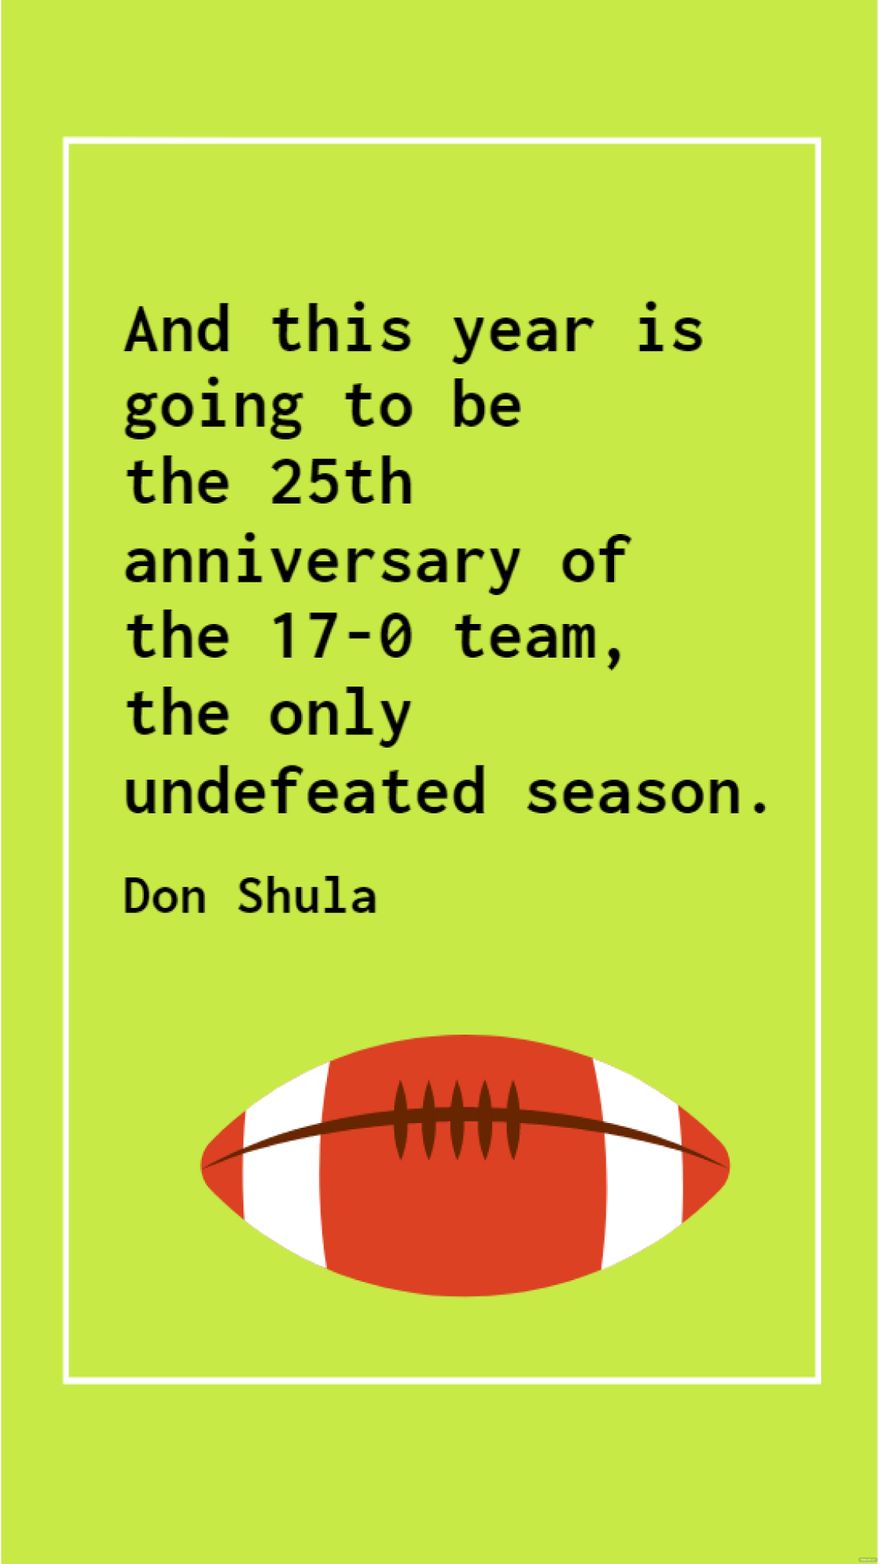 Don Shula - And this year is going to be the 25th anniversary of the 17-0 team, the only undefeated season. in JPG